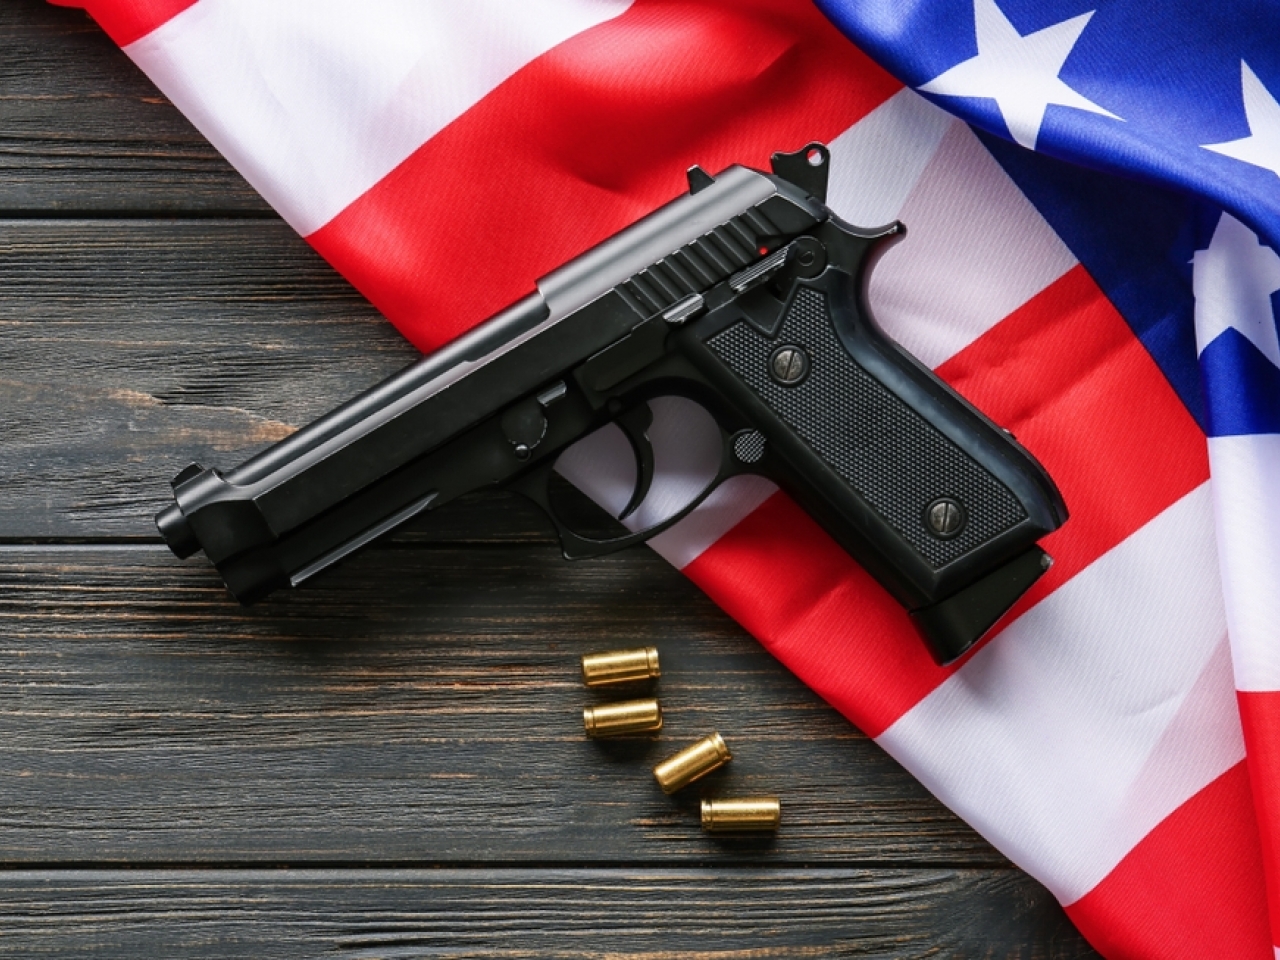 Shootings killed 314 children under 11 years old in the US last year. Photo: Shutterstock